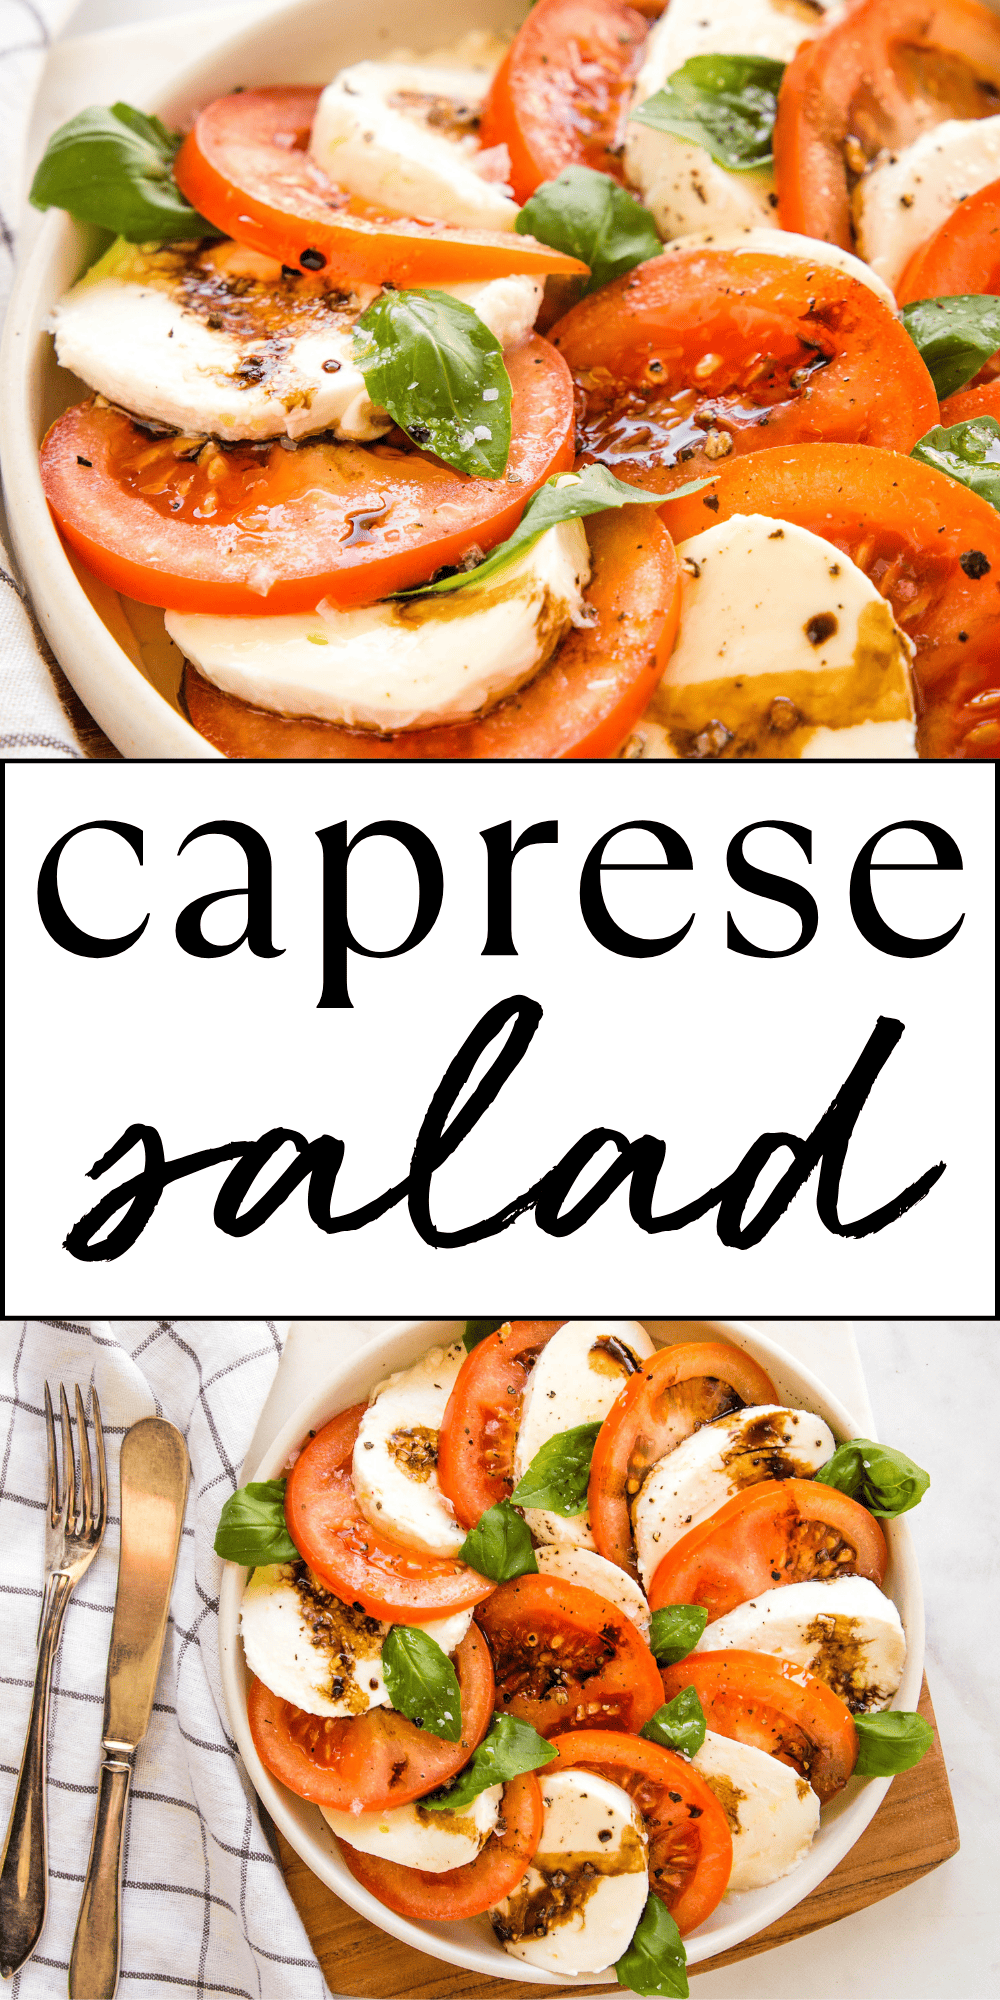 This Caprese Salad recipe is the ultimate guide for how to make Caprese Salad, the classic Italian appetizer made with fresh mozzarella, juicy tomatoes and fresh basil. An easy, healthy salad recipe for summer that's ready in minutes! Recipe from thebusybaker.ca! #capresesalad #capresesaladrecipe #easysaladrecipe #Italiansaladrecipe #italianrecipe #caprese #capri #healthysalad via @busybakerblog